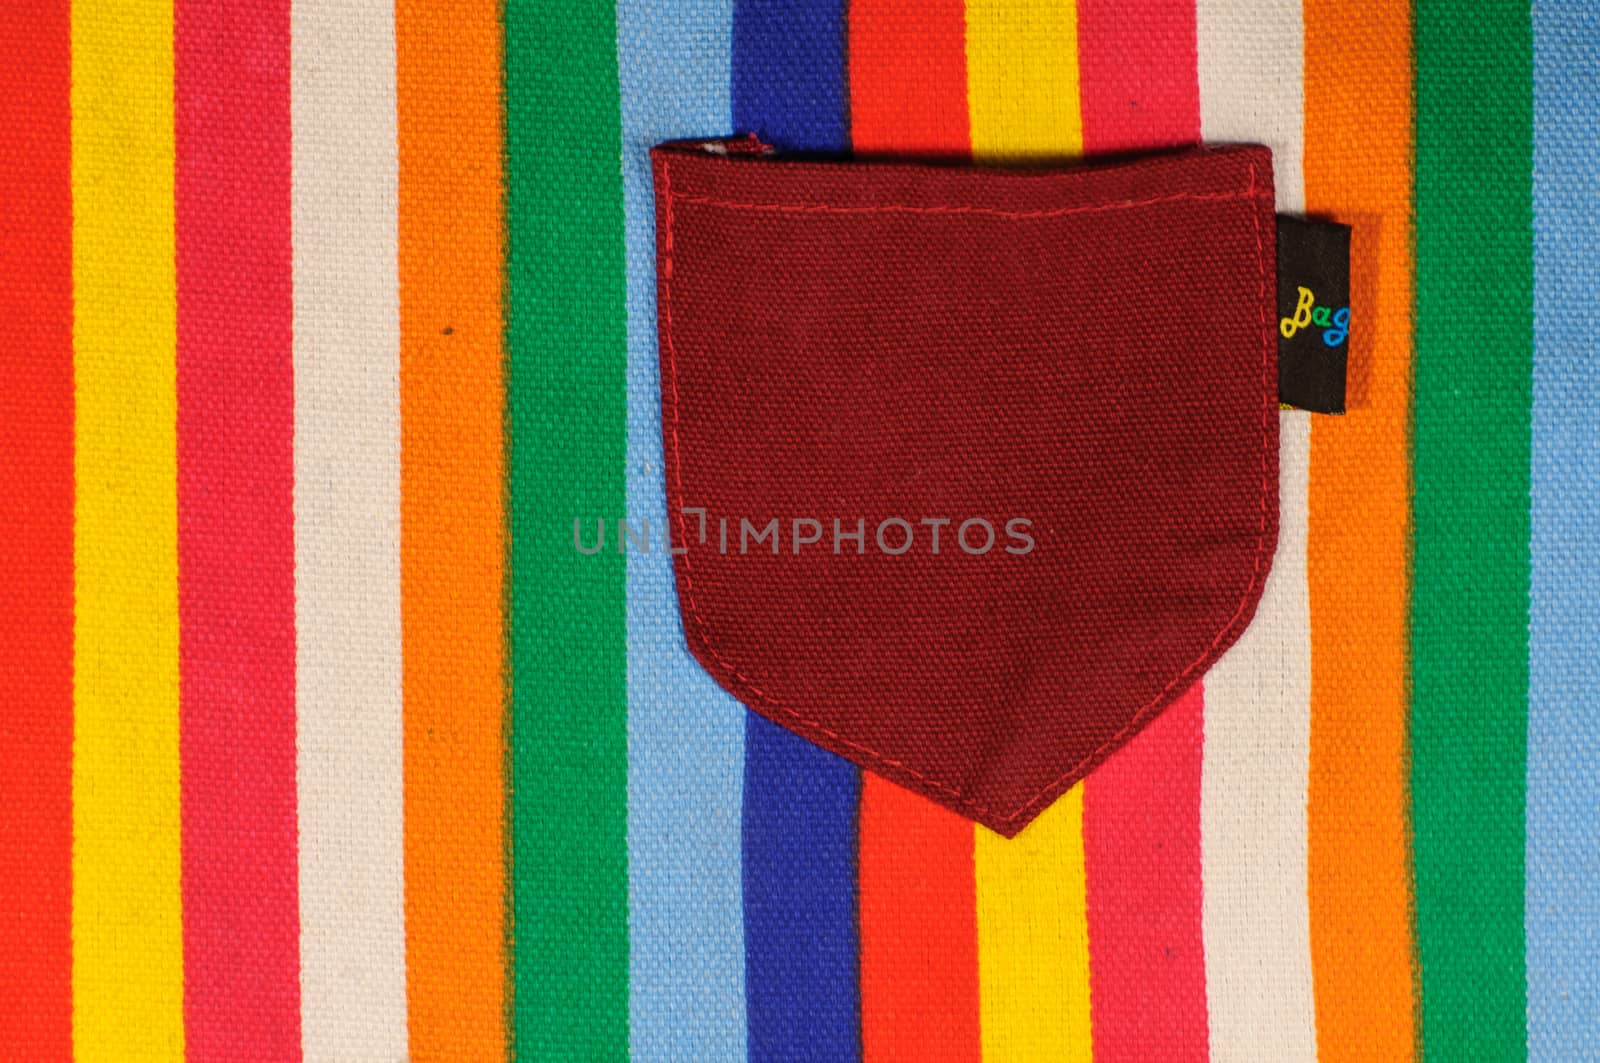 The Pocket and multi-colored background